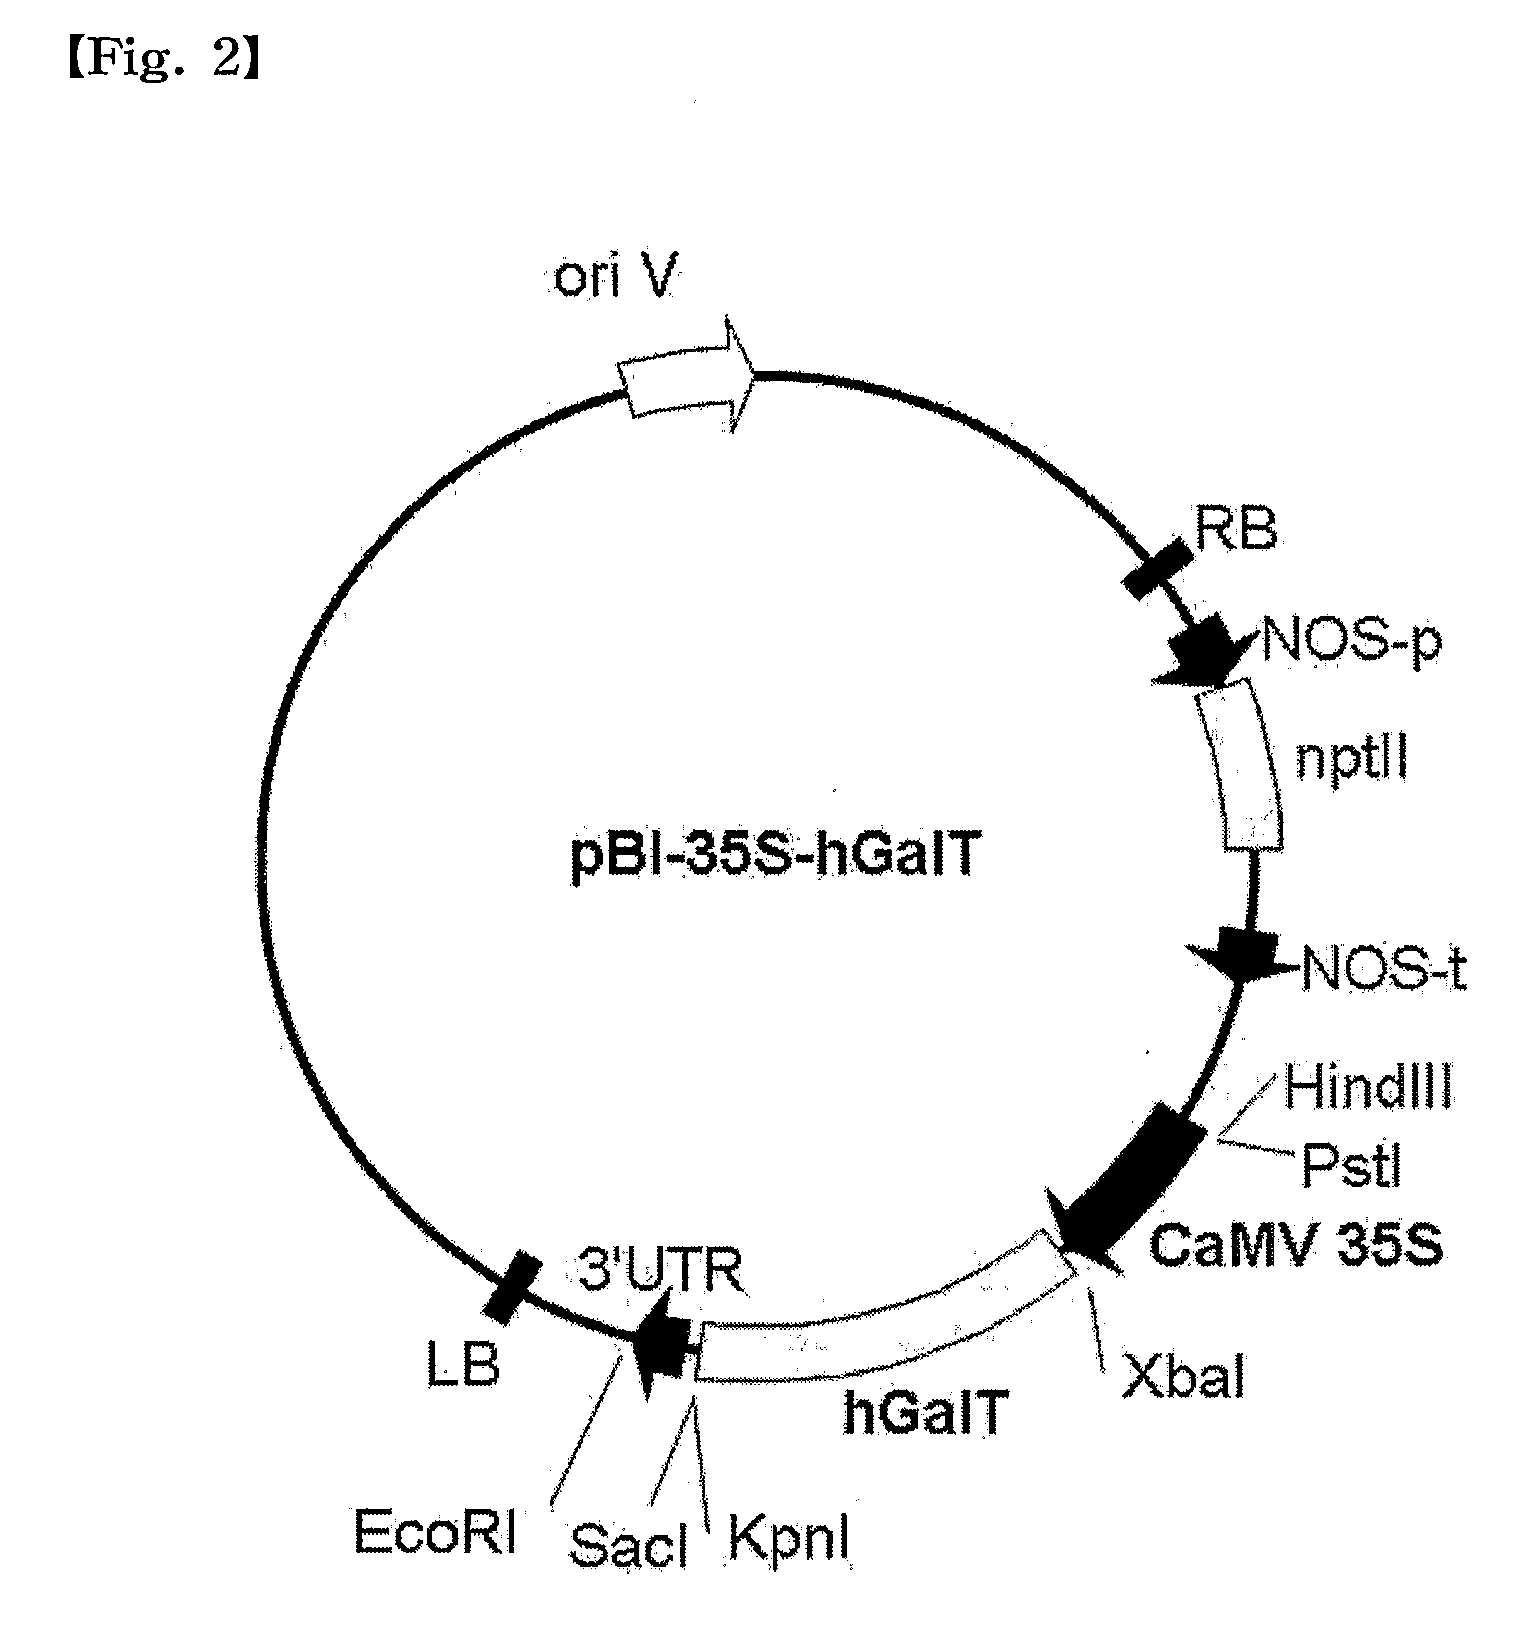 Plant Recombinant Human CTLA4IG and a Method for Producing the Same